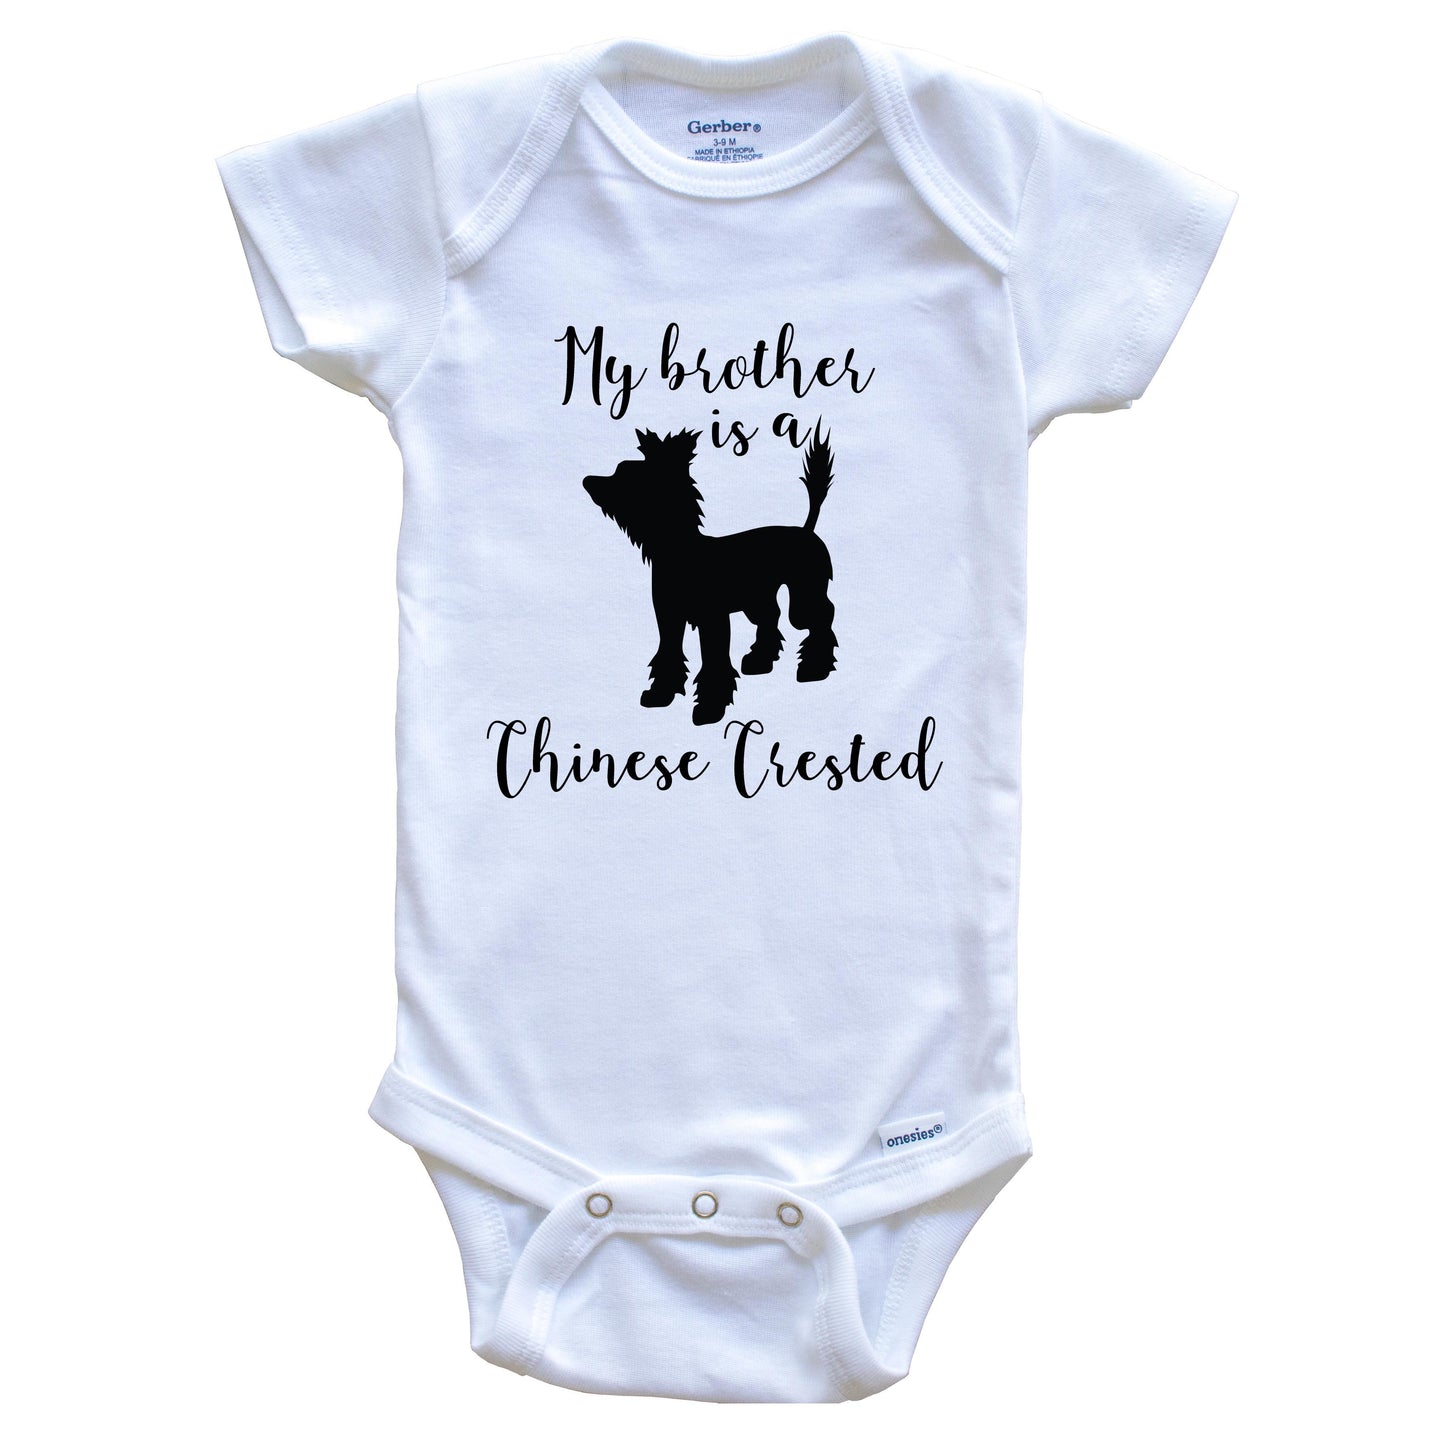 My Brother Is A Chinese Crested Cute Dog Baby Onesie - Chinese Crested One Piece Baby Bodysuit